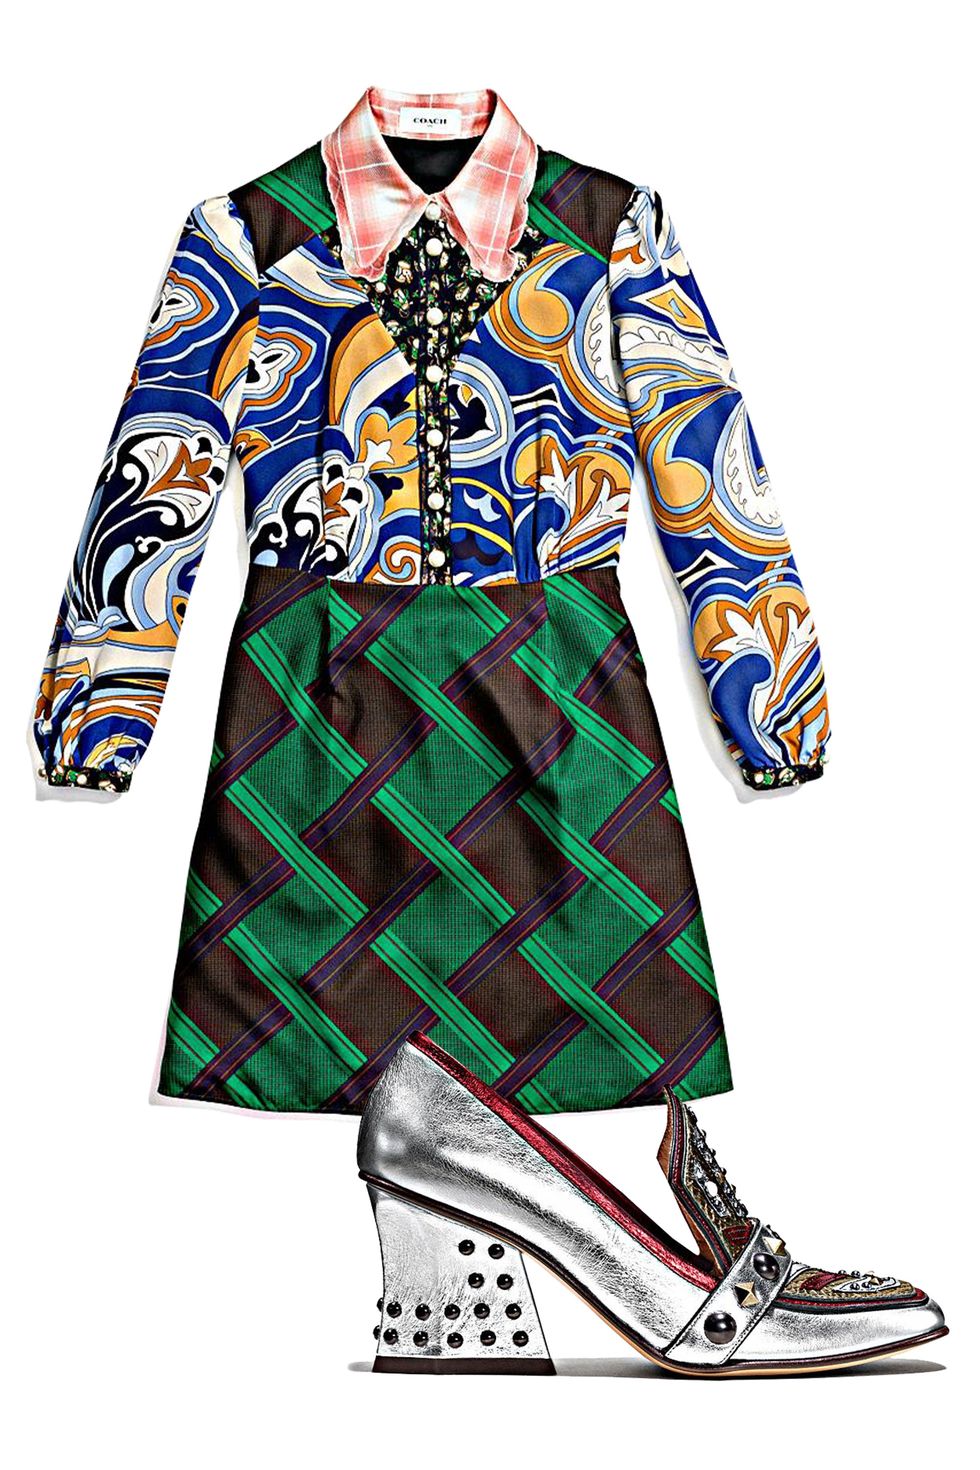 <p>This fall, max out on cute and quirky 60s-inspired prints—but leave those conservative black pumps at home. Instead, opt for equally dramatic shoes and accessories.
</p><p><br>
</p><p><em data-redactor-tag="em">Coach 1941&nbsp;Mini Fitted Scarf Dress With Placement, $795, <a rel="noskim" href="http://www.coach.com/coach-designer-dresses-mini-fitted-scarf-dress-with-placement/57063.html?CID=D_B_HBZ_11845" target="_blank">coach.com</a>; Coach 1941 High Vamp Loafer With Shield, $395, <a rel="noskim" href="http://www.coach.com/coach-designer-flats-high-vamp-loafer-with-shield/Q8920.html?CID=D_B_HBZ_11846" target="_blank">coach.com</a></em><span class="redactor-invisible-space" data-verified="redactor" data-redactor-tag="span" data-redactor-class="redactor-invisible-space"><em data-redactor-tag="em"></em></span><br></p>